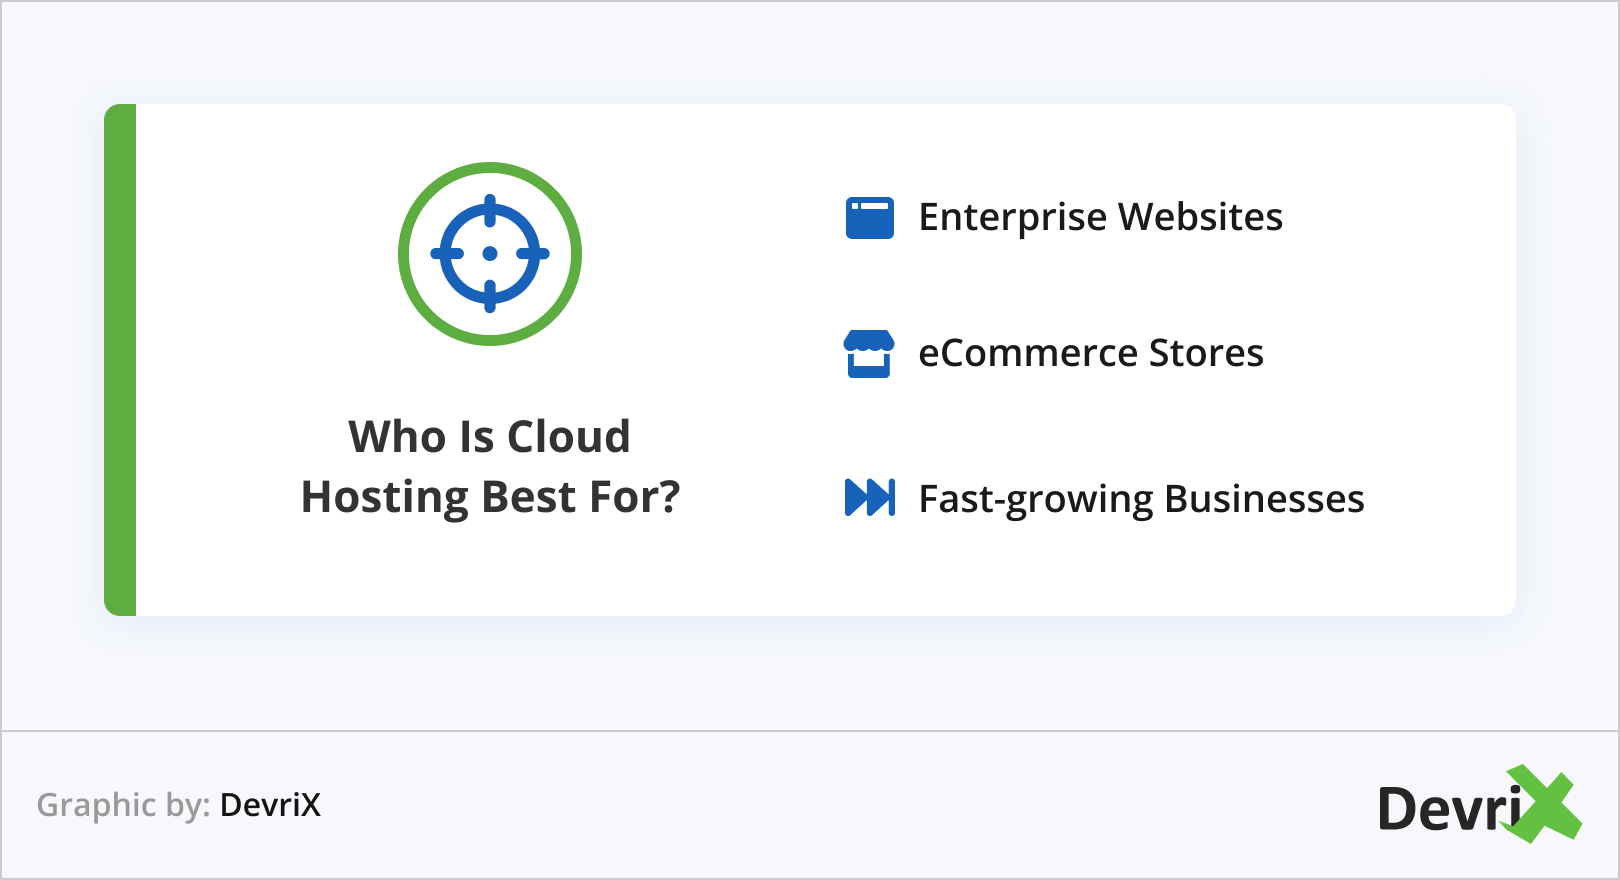 7. Who is Cloud hosting best for